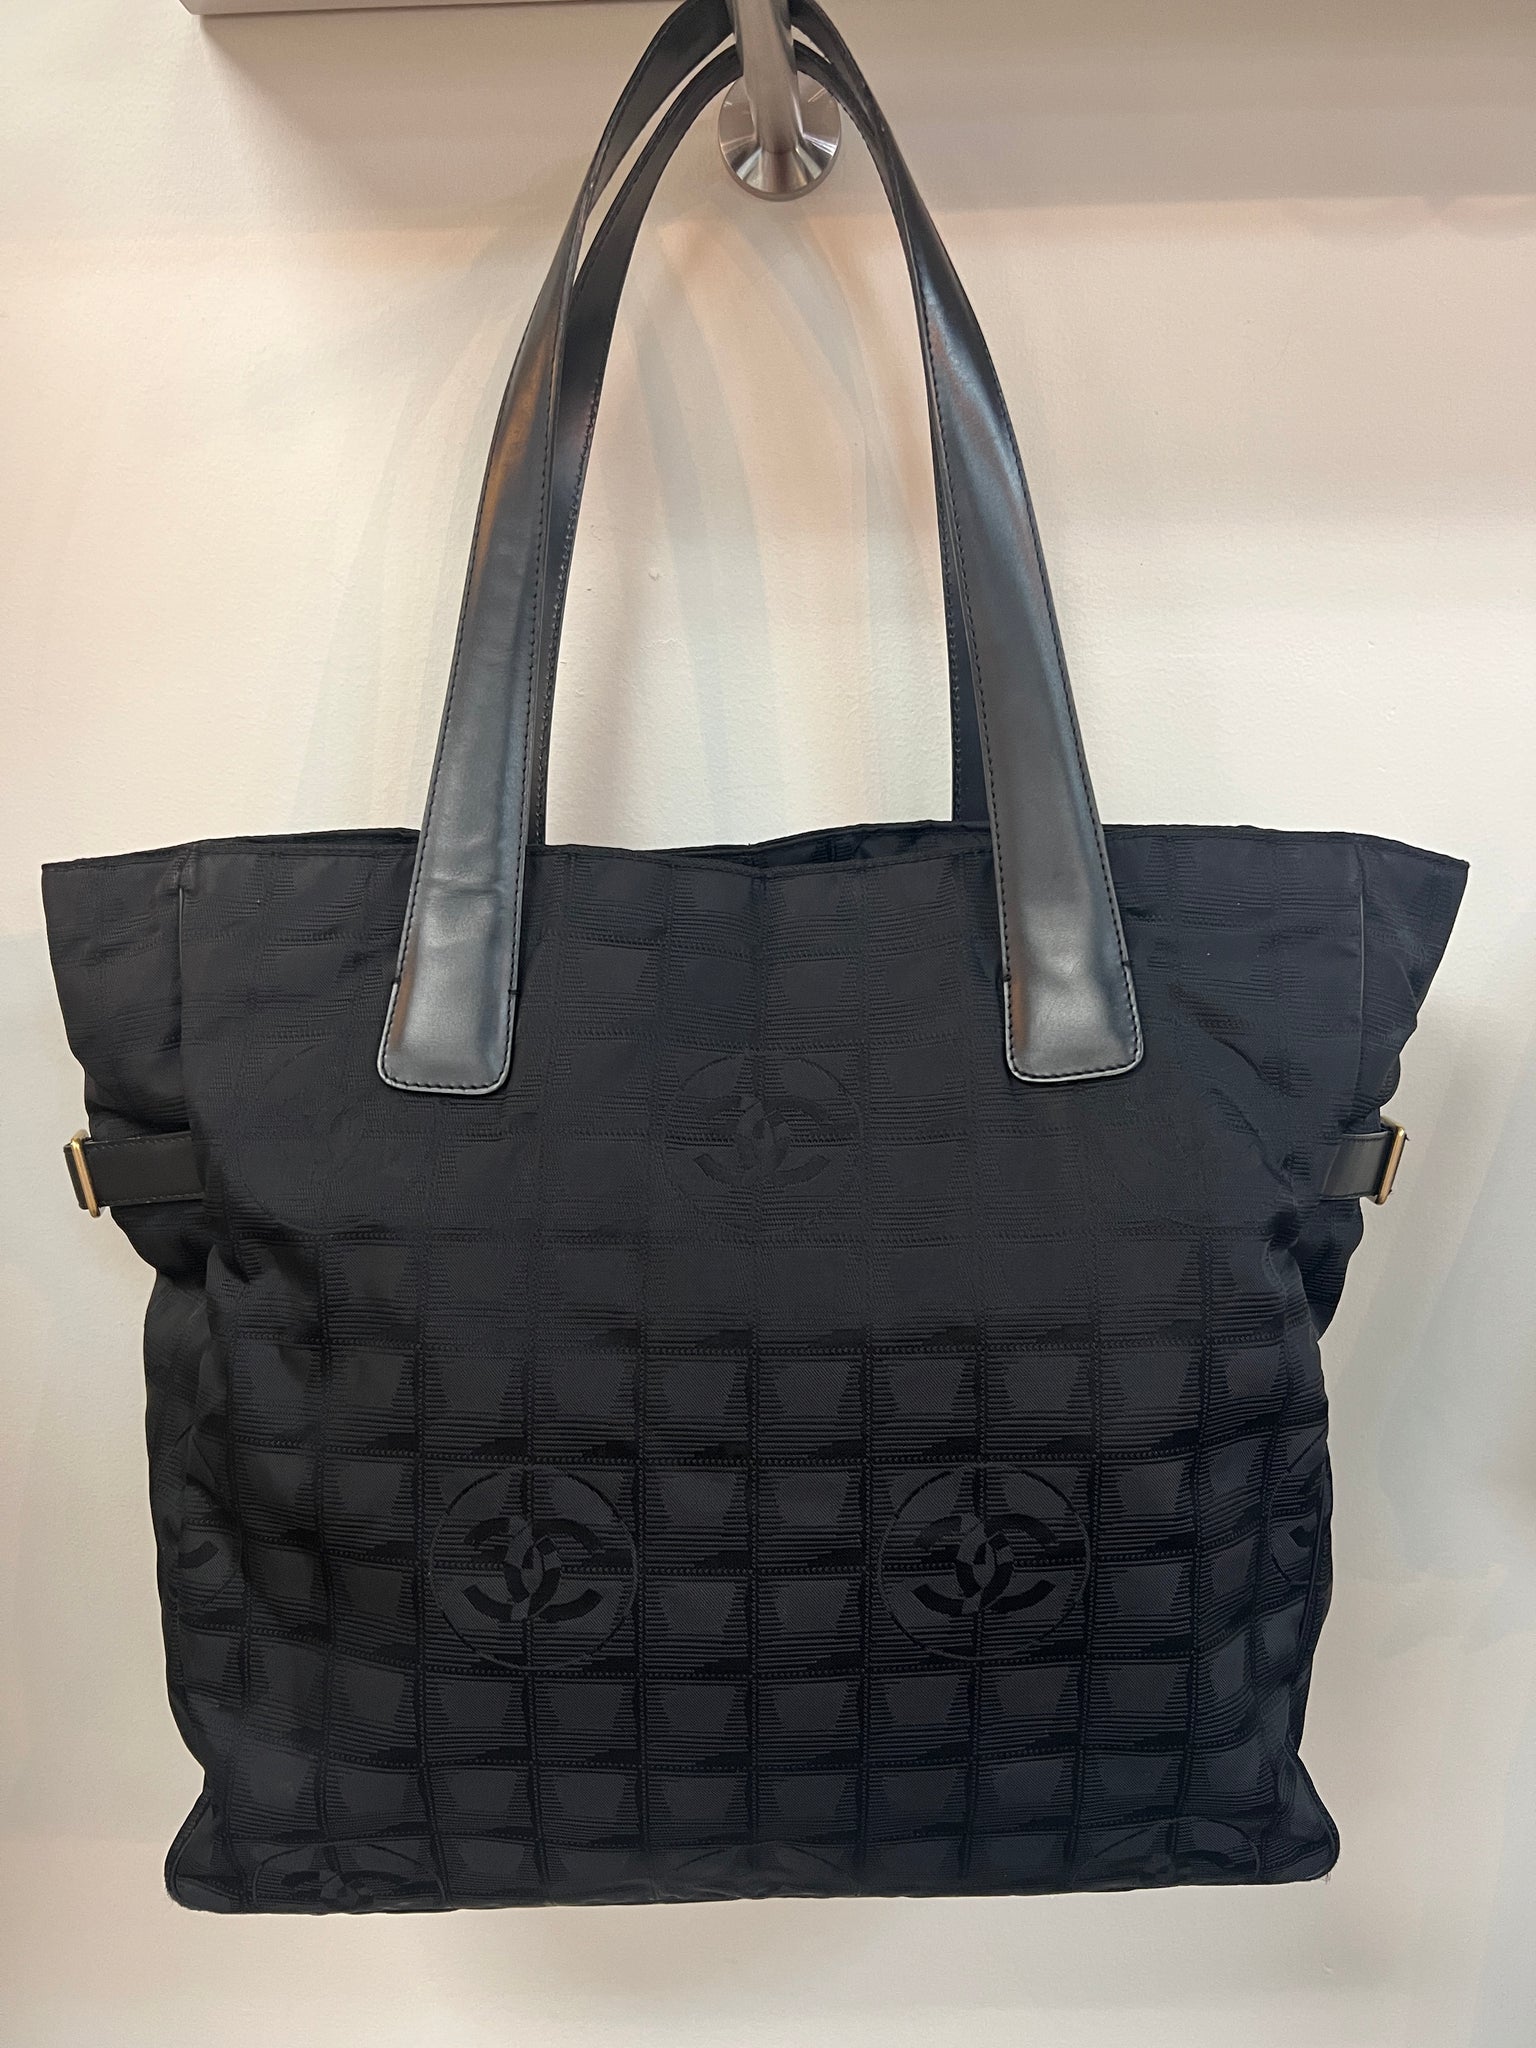 Chanel - Authenticated Handbag - Cloth Black for Women, Very Good Condition